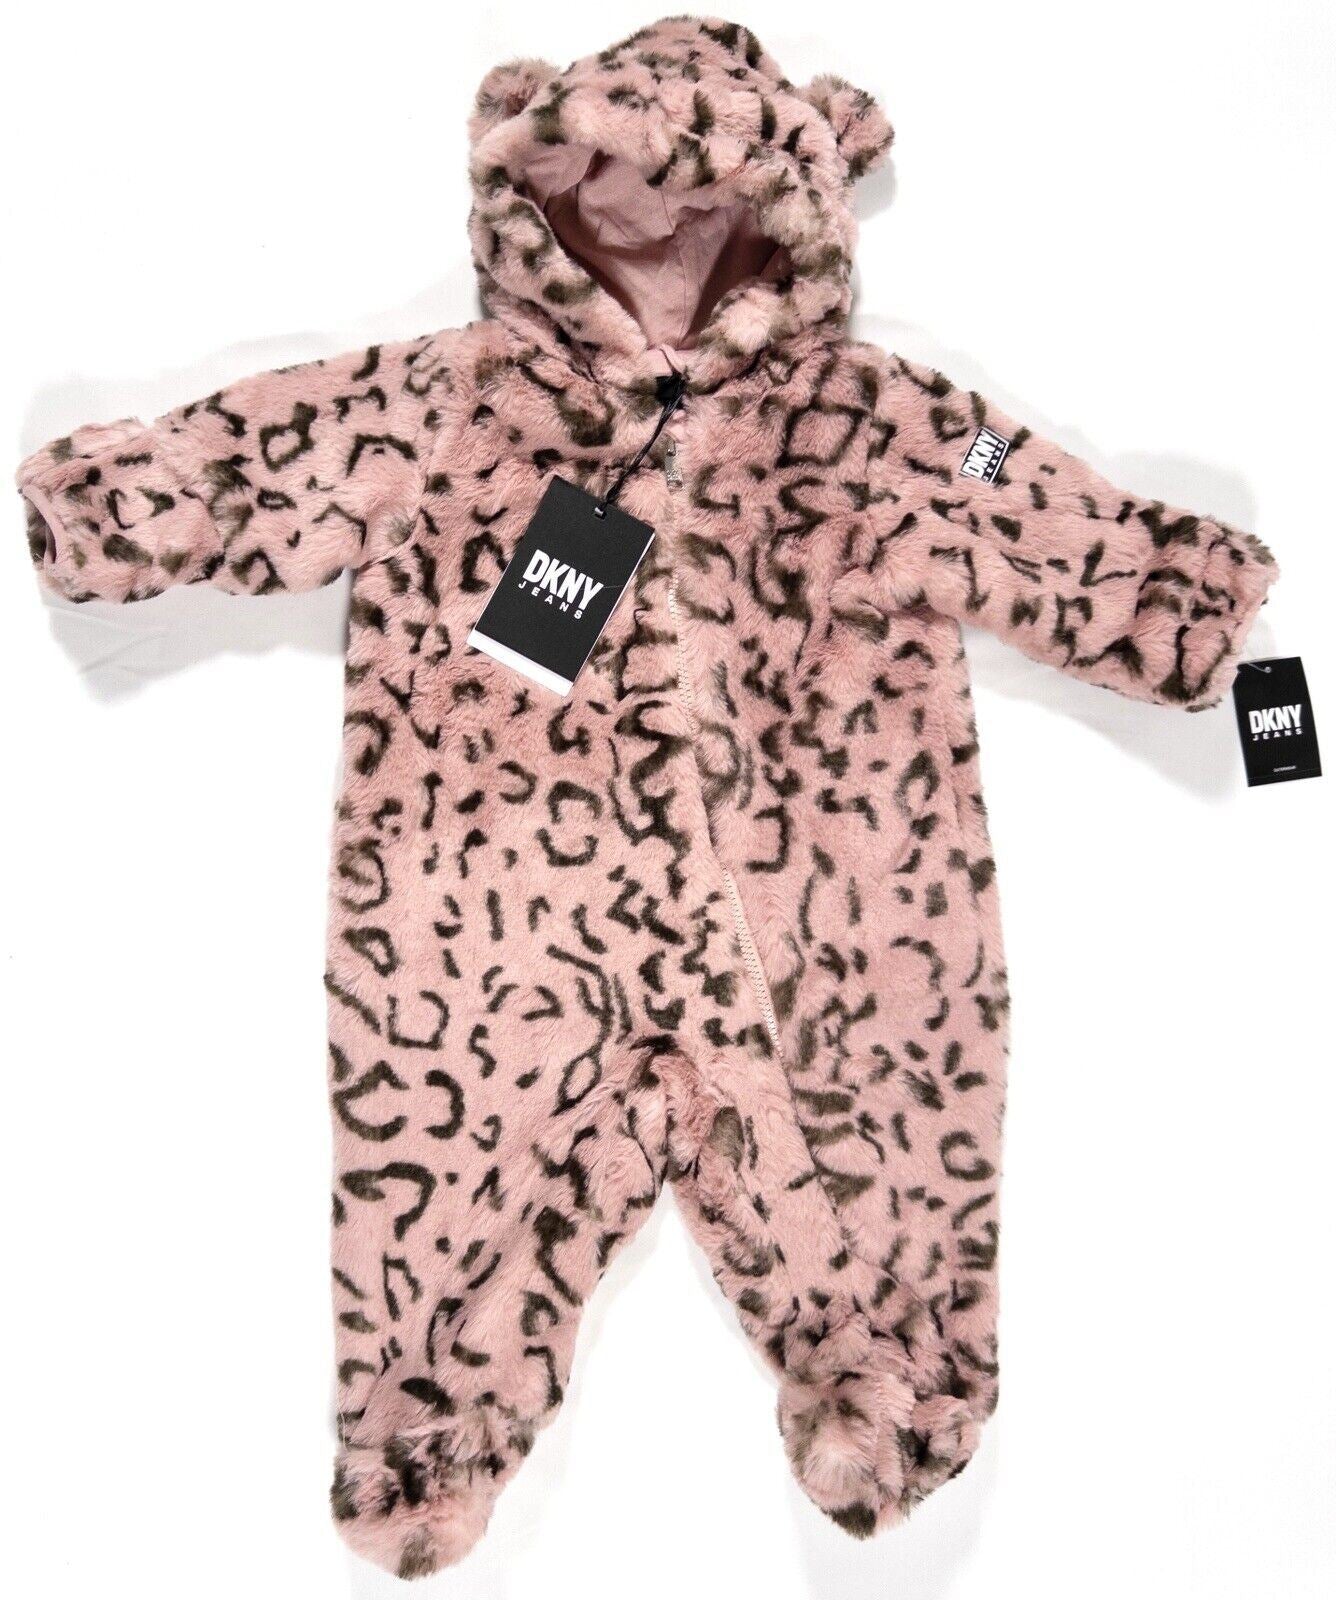 DKNY JEANS Baby Infant All in One Snowsuit Pink Size UK 6-9 Months